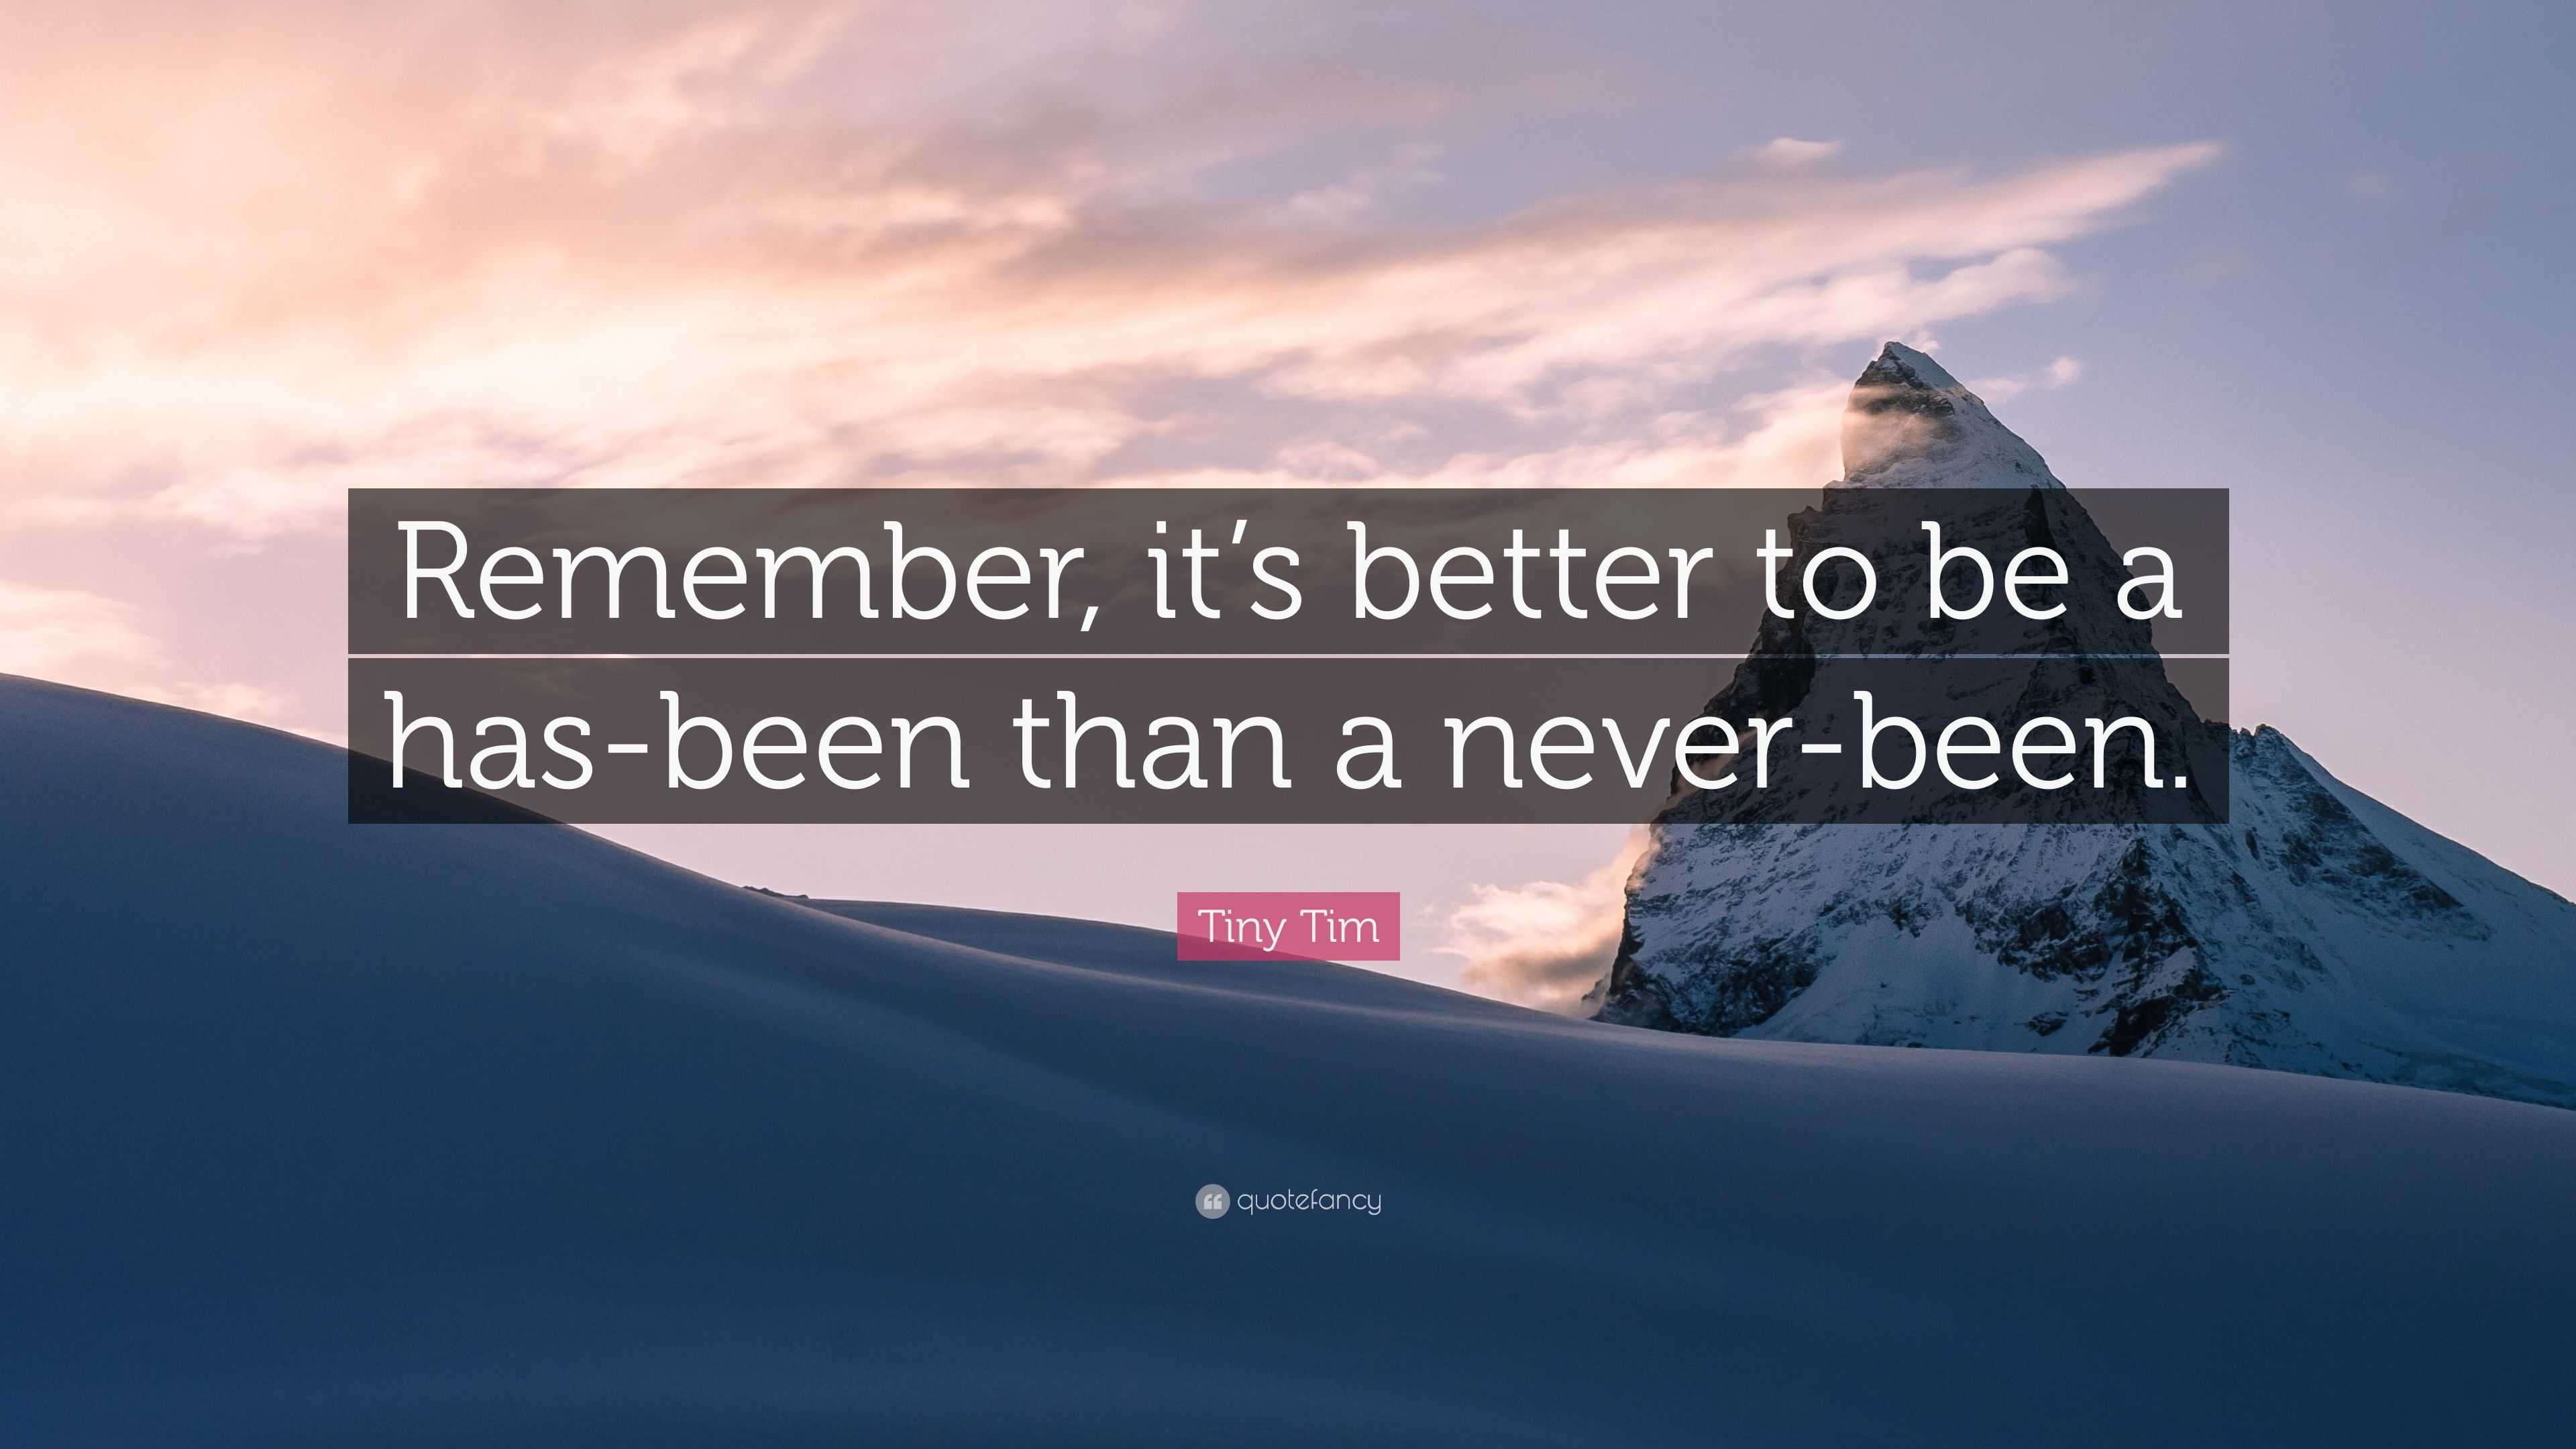 Tiny Tim Quote: "Remember, it's better to be a has-been ...